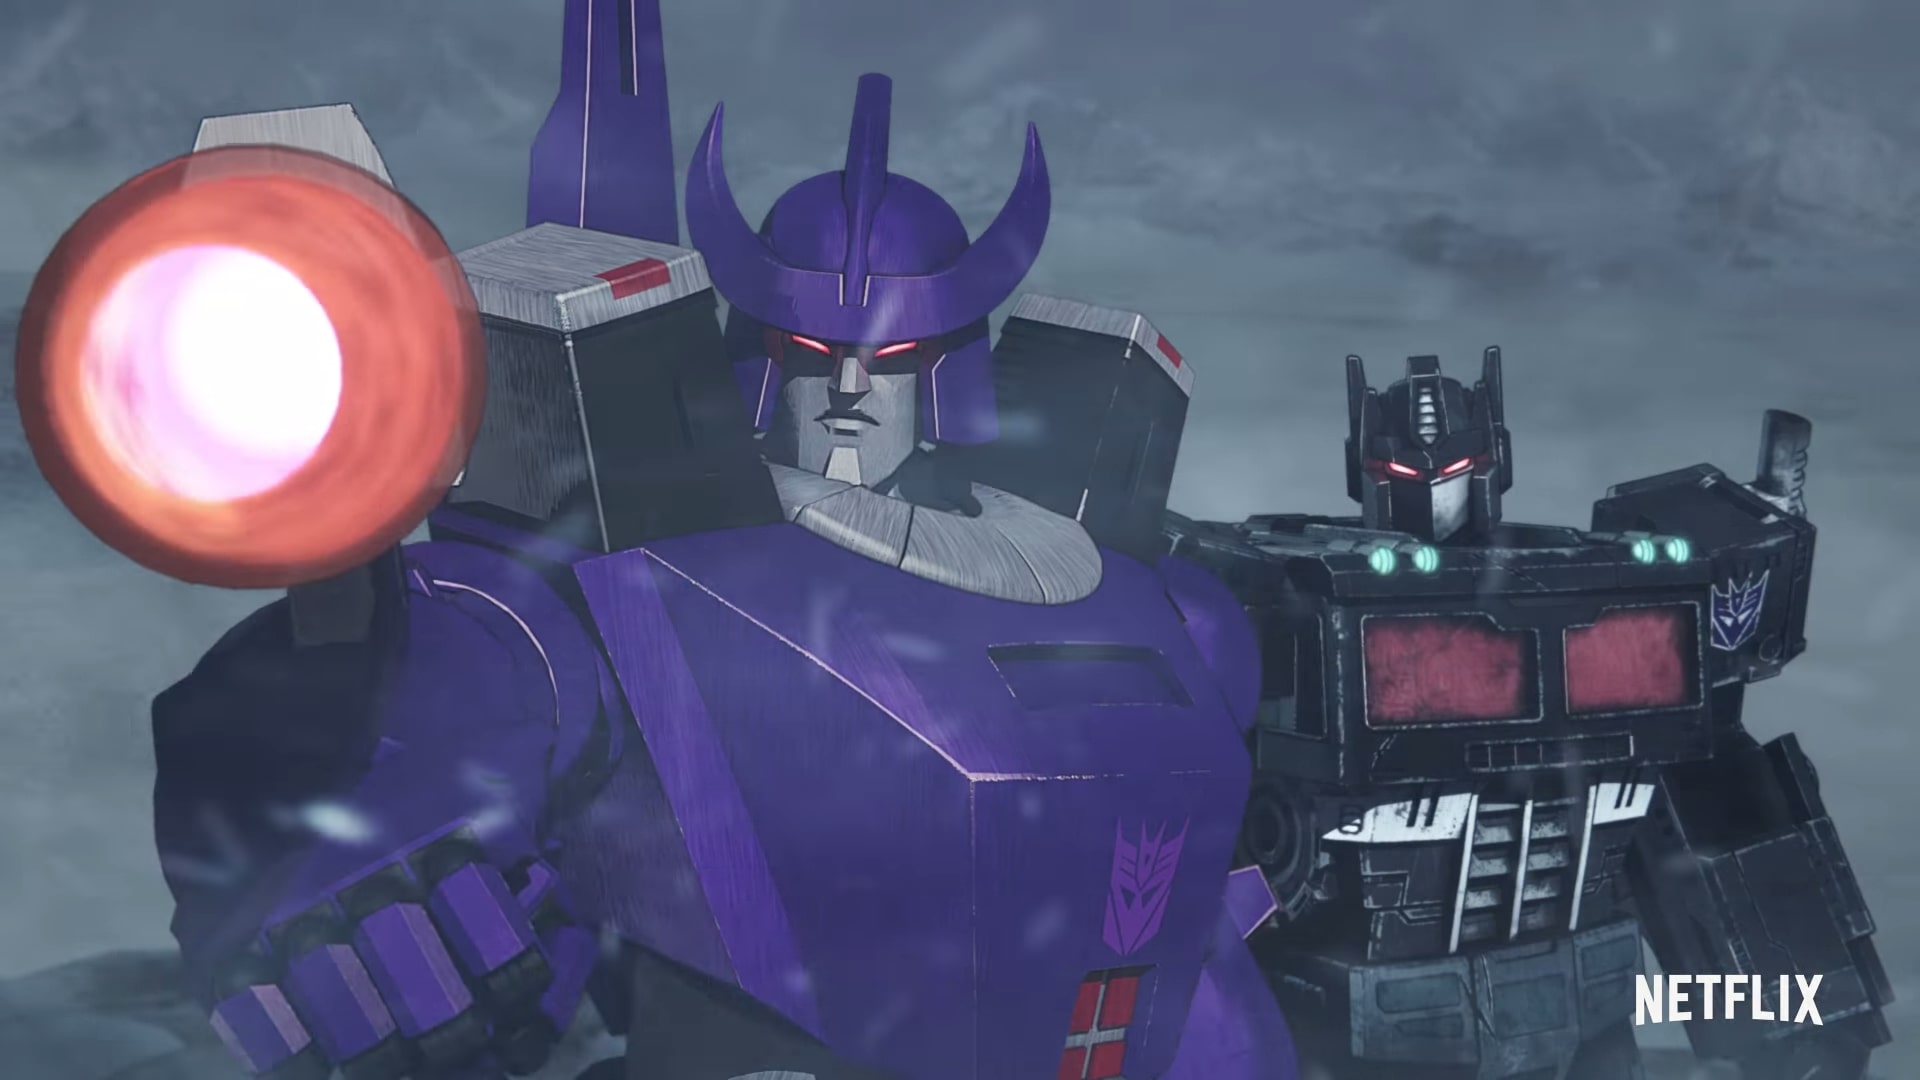 Netflix Transformers War for Cybertron Trilogy Kingdom Trailer, Coming to Netflix in July 2021